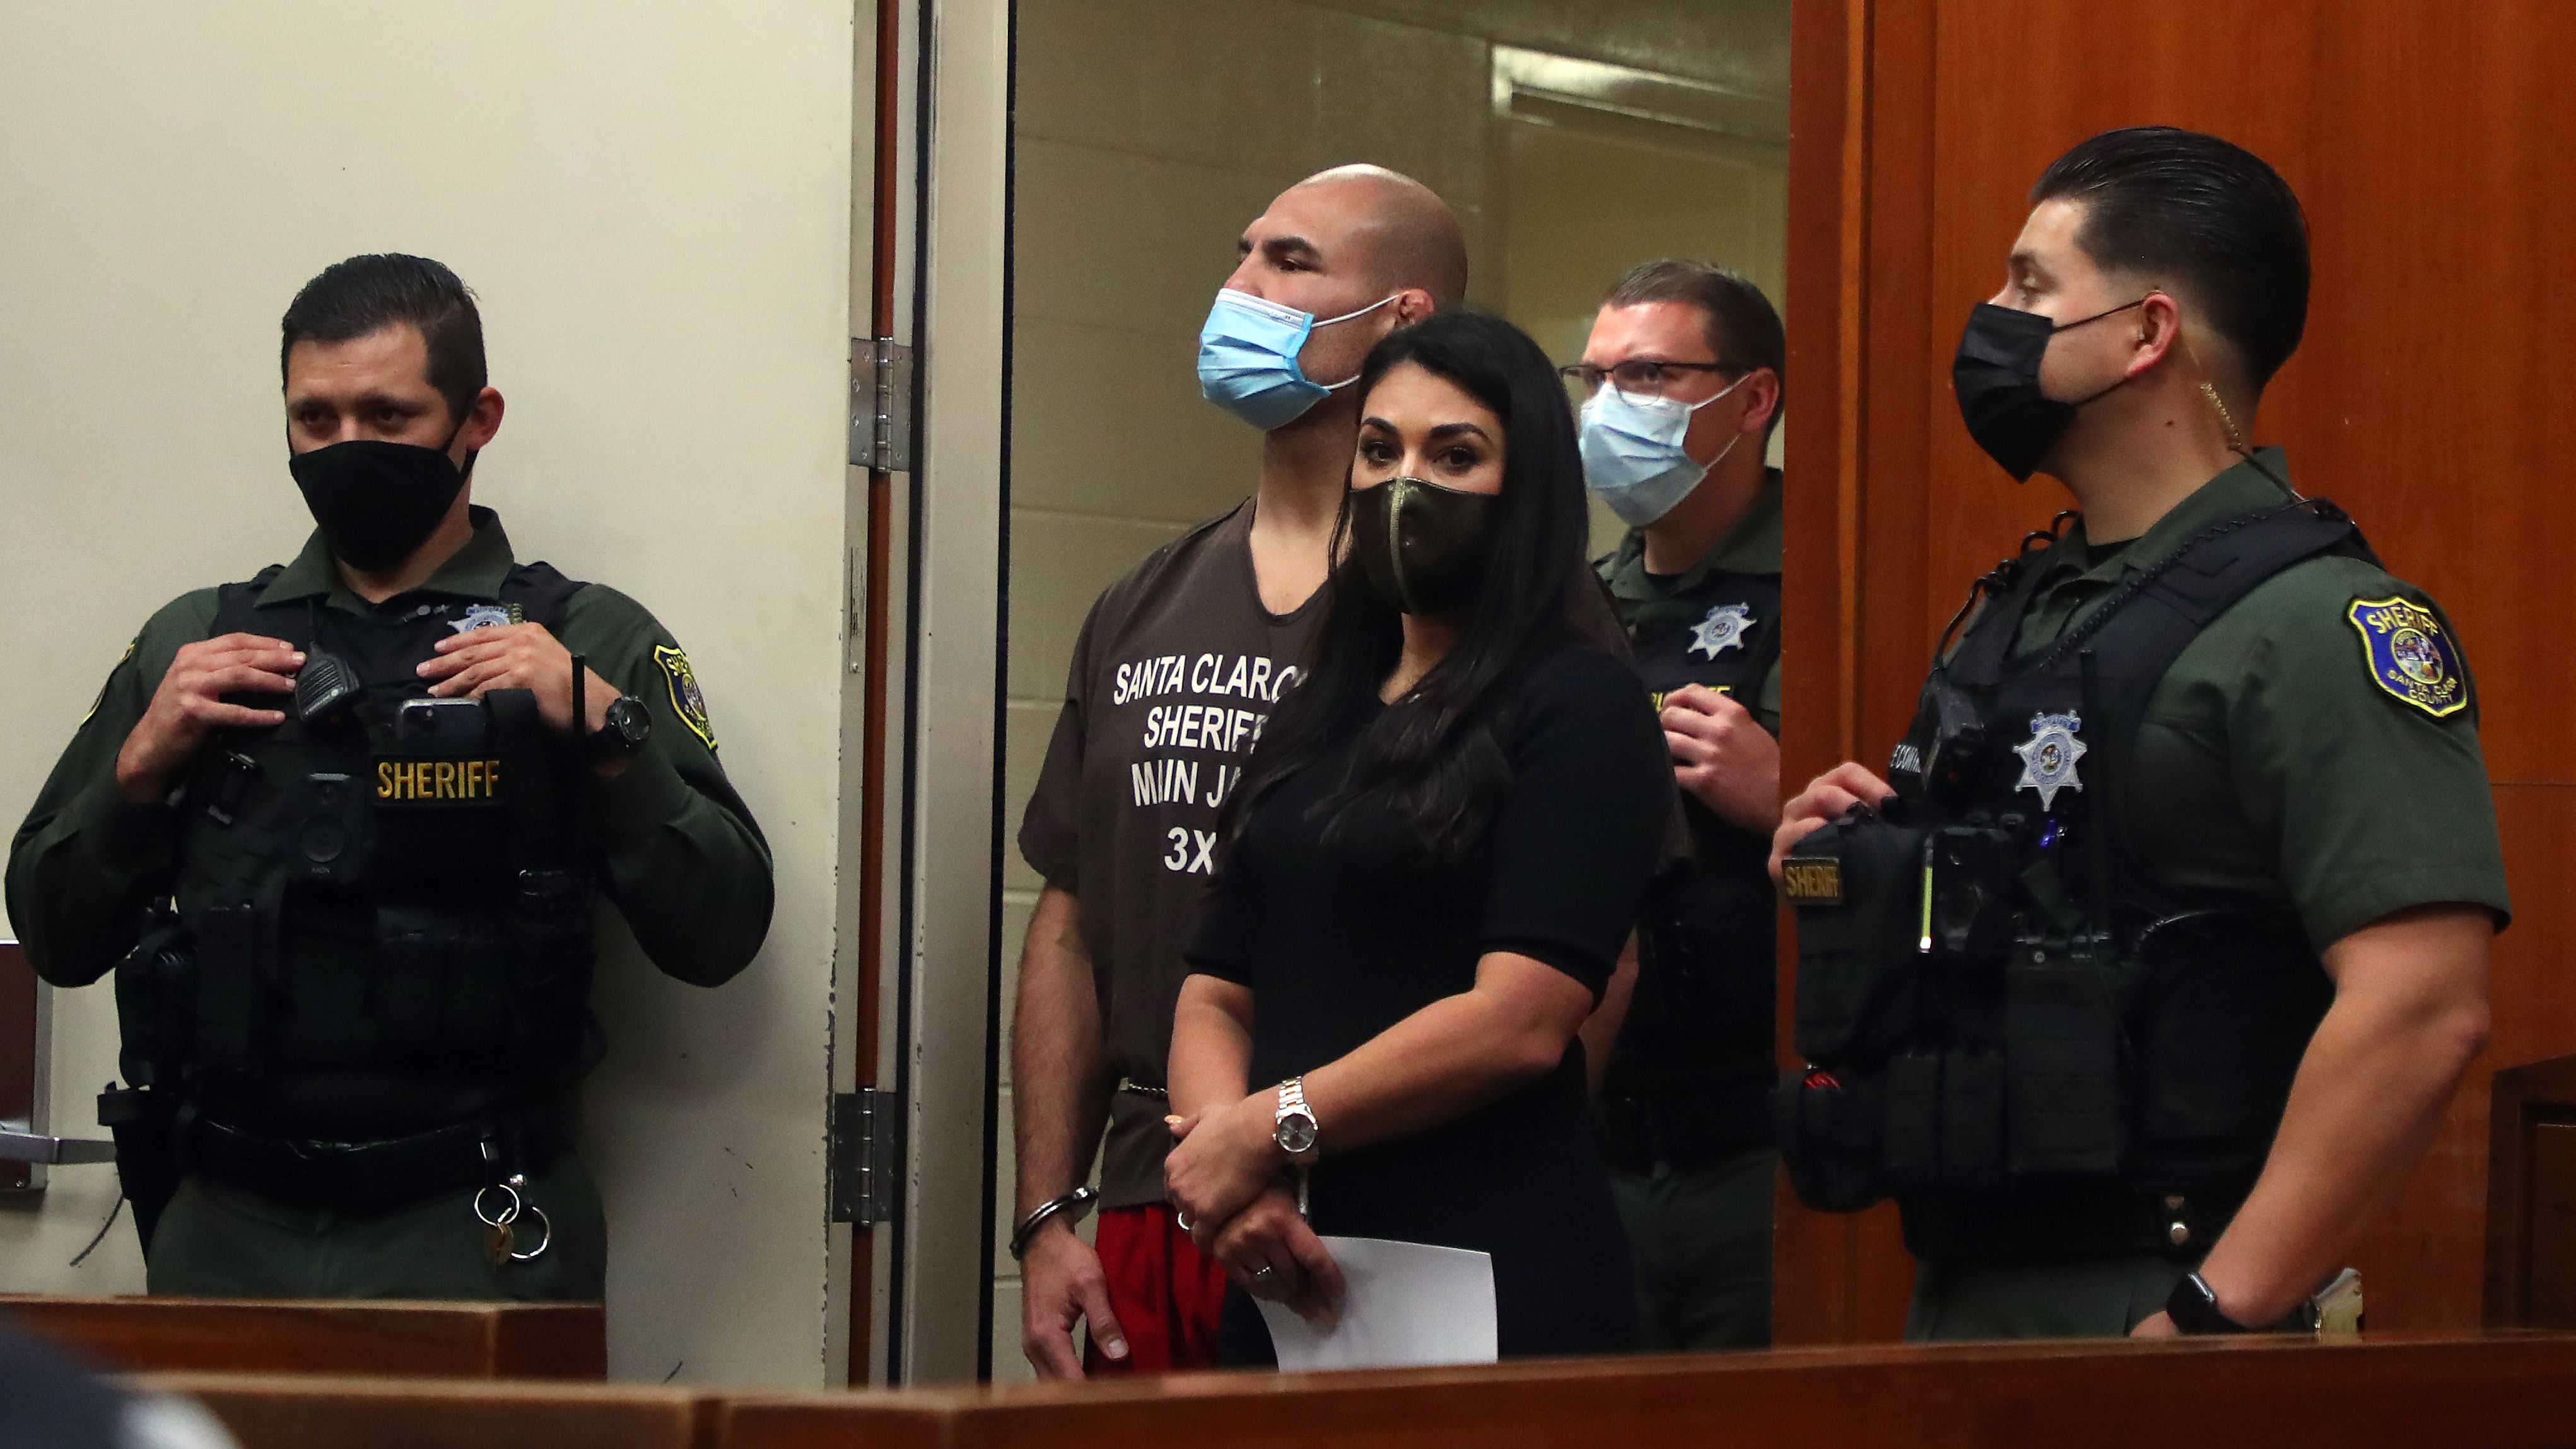 Cain Velasquez, second from left, makes a court appearance on an attempted murder charge at the Santa Clara County Hall of Justice on Wednesday, March 2, 2022, in San Jose, California.